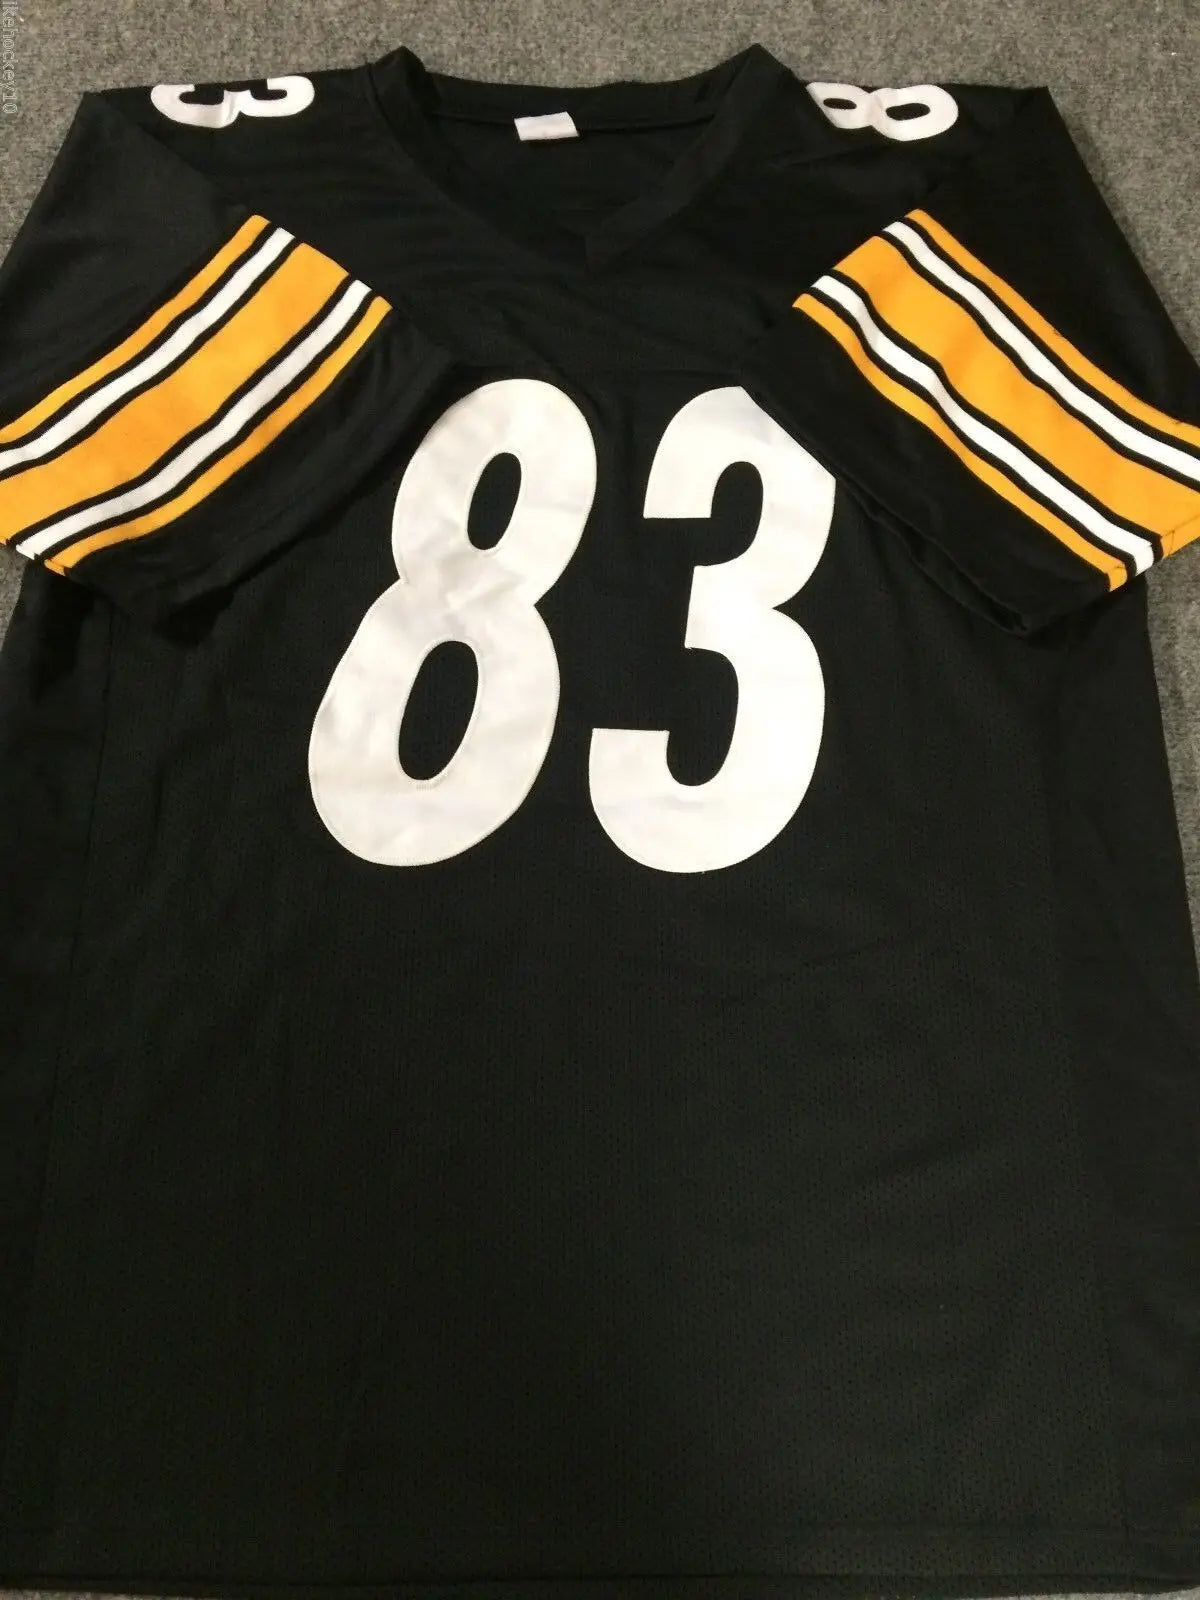 MVP Authentics Heath Miller Autographed Signed Pittsburgh Steelers Jersey Jsa  Coa 126 sports jersey framing , jersey framing